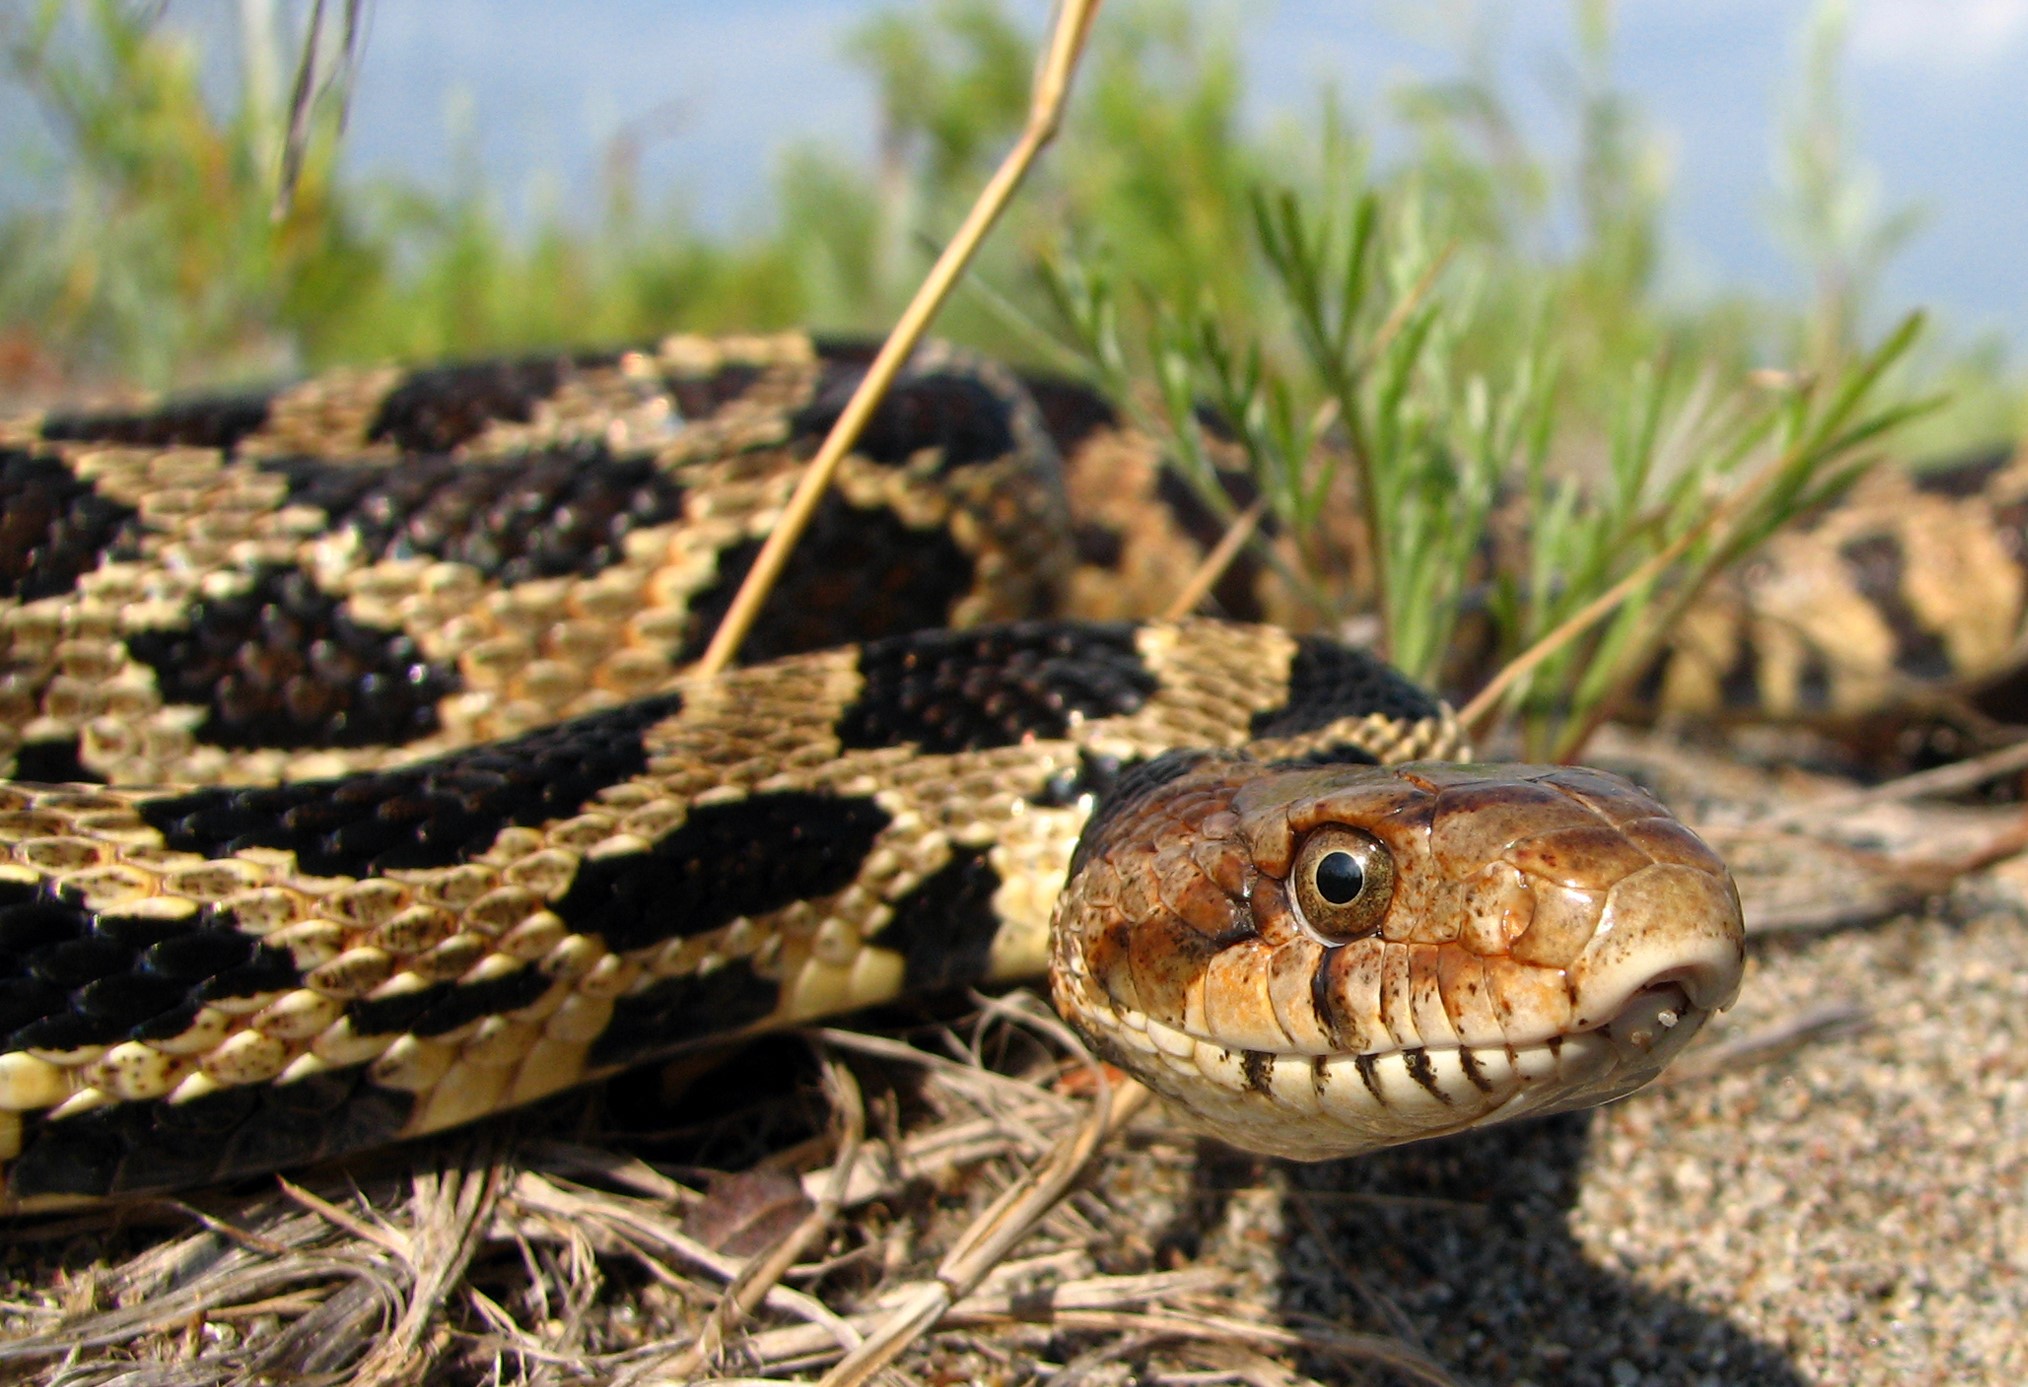 An eastern fox snake slithering towards the camera.